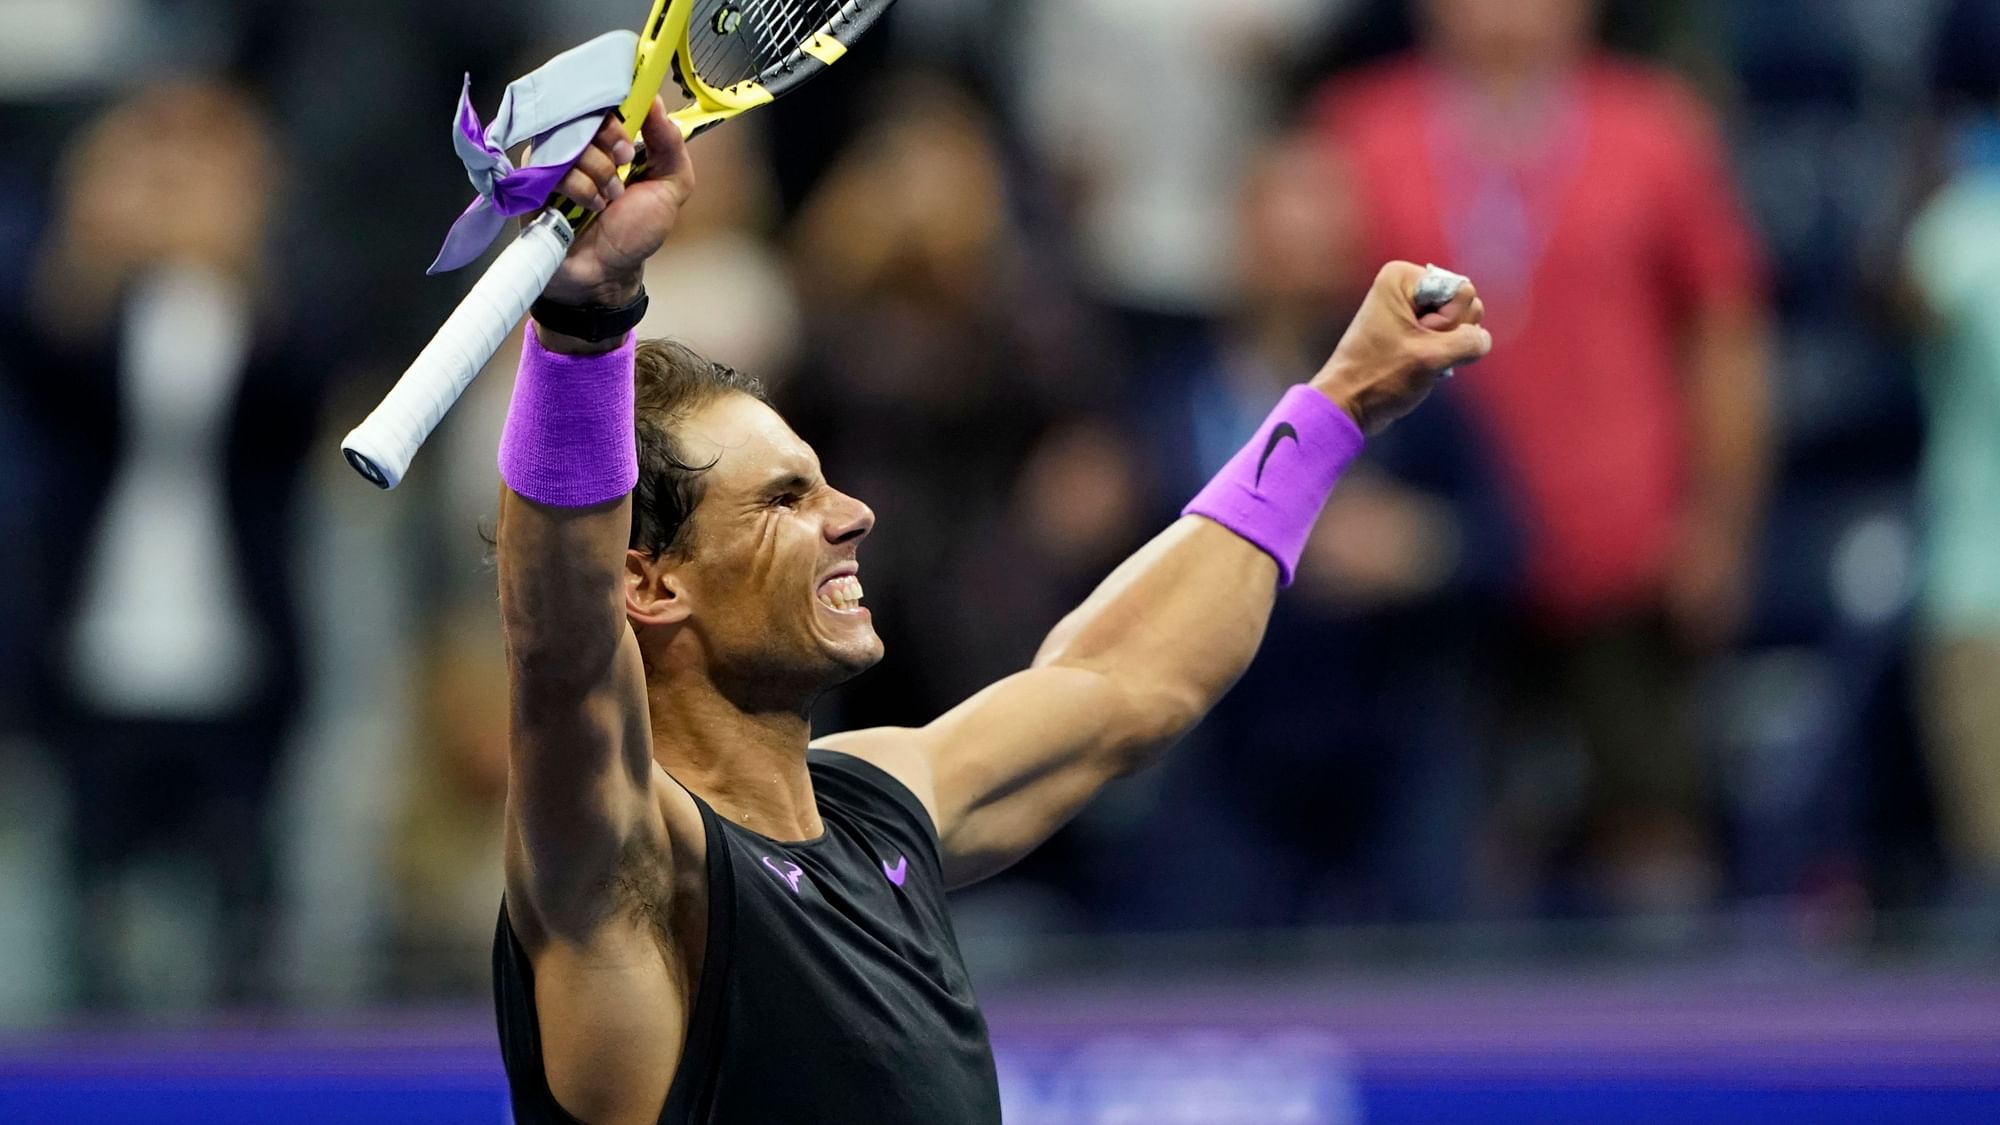 Rafael Nadal, of Spain, celebrates after defeating Matteo Berrettini, of Italy, in the men’s singles semifinals of the U.S. Open tennis championships Friday, Sept. 6, 2019, in New York.